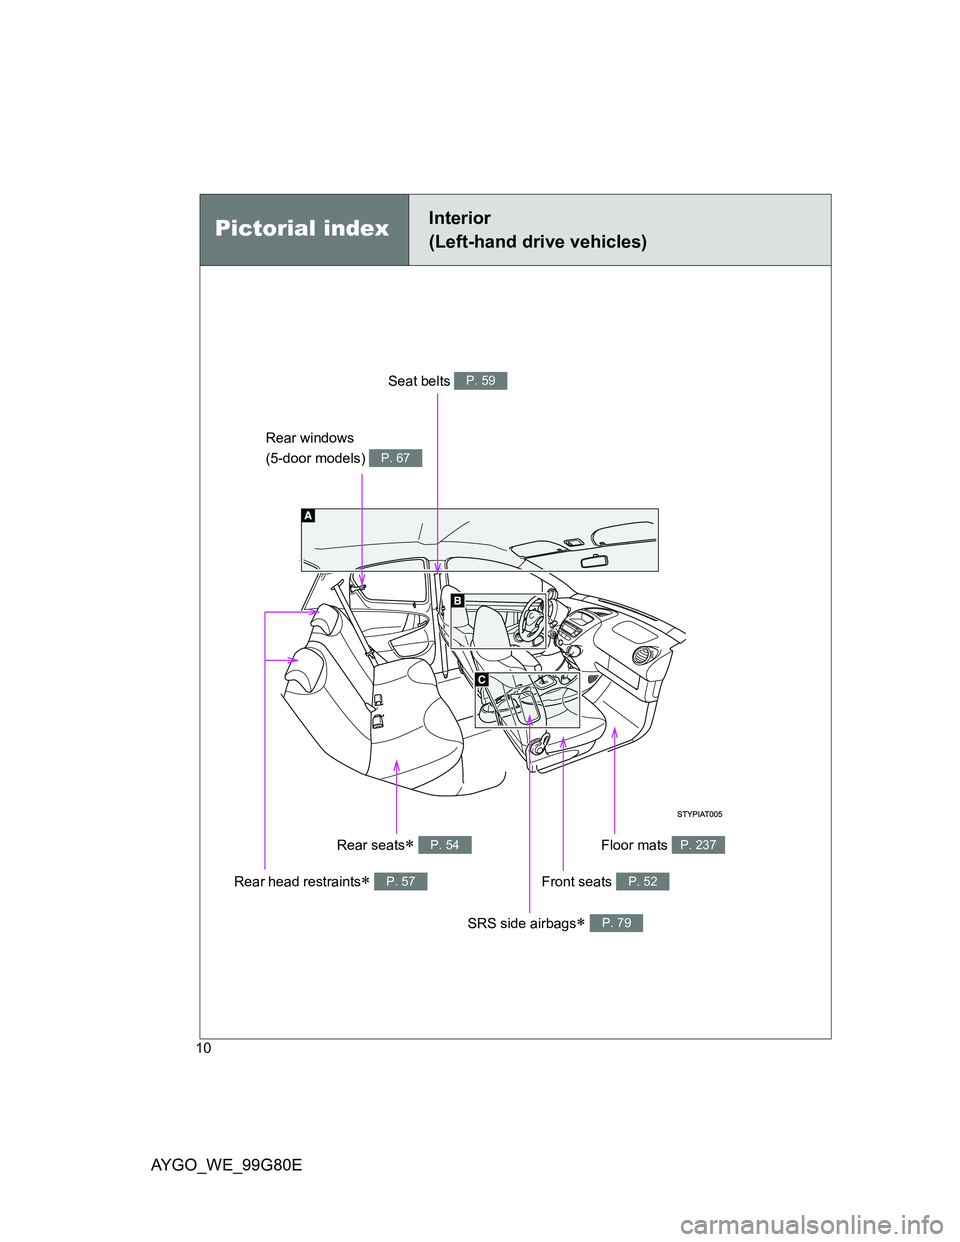 TOYOTA AYGO 2013  Owners Manual (in English) AYGO_WE_99G80E
10
Pictorial indexInterior 
(Left-hand drive vehicles)
Rear windows 
(5-door models) 
P. 67
Front seats P. 52
SRS side airbags P. 79
Floor mats P. 237
Rear head restraints P. 57
R